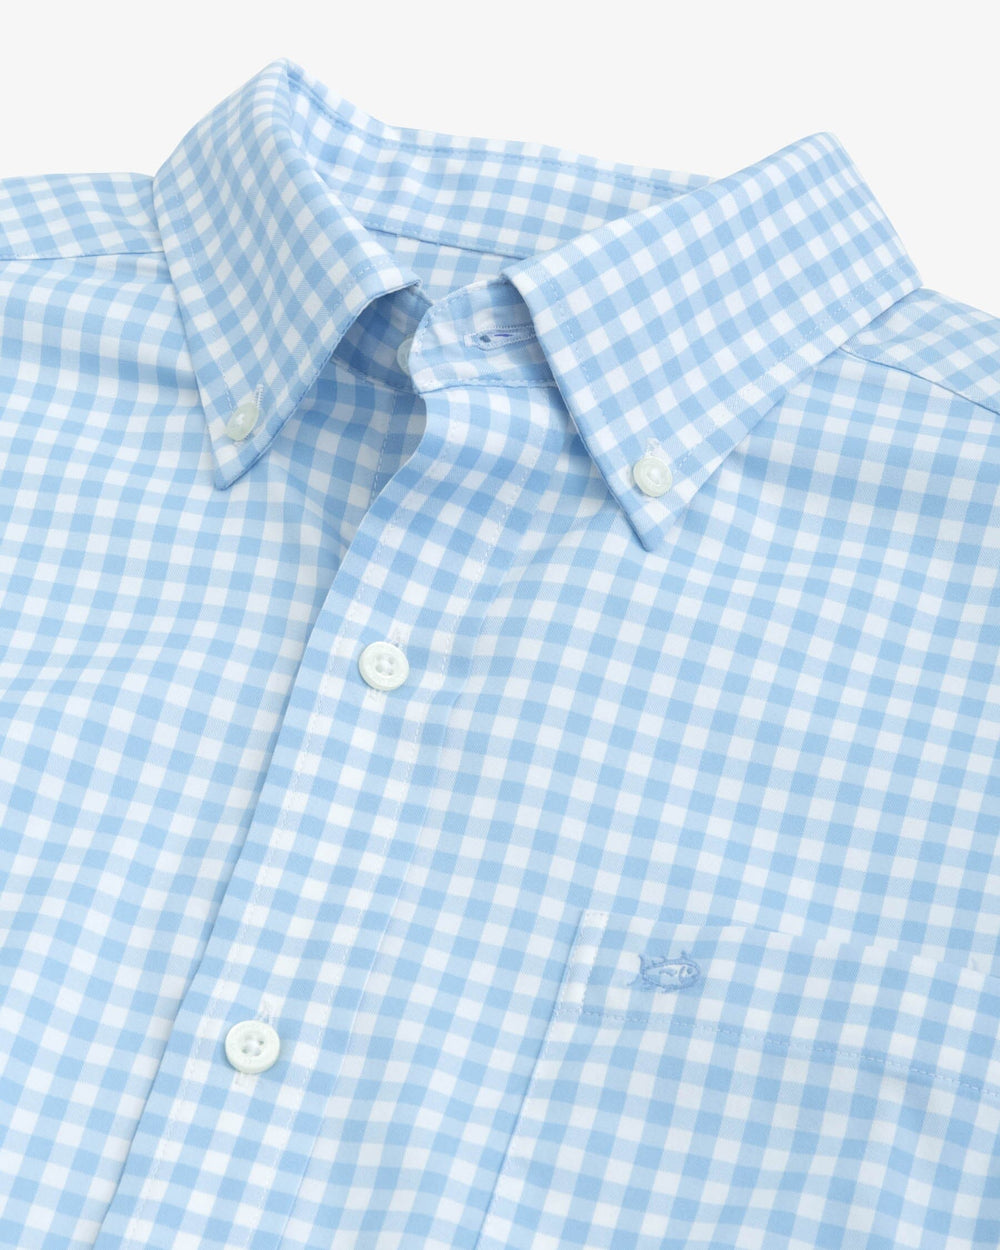 The detail view of the Southern Tide Heather Hartwell Plaid Intercoastal Sport Shirt by Southern Tide - Heather Rain Water